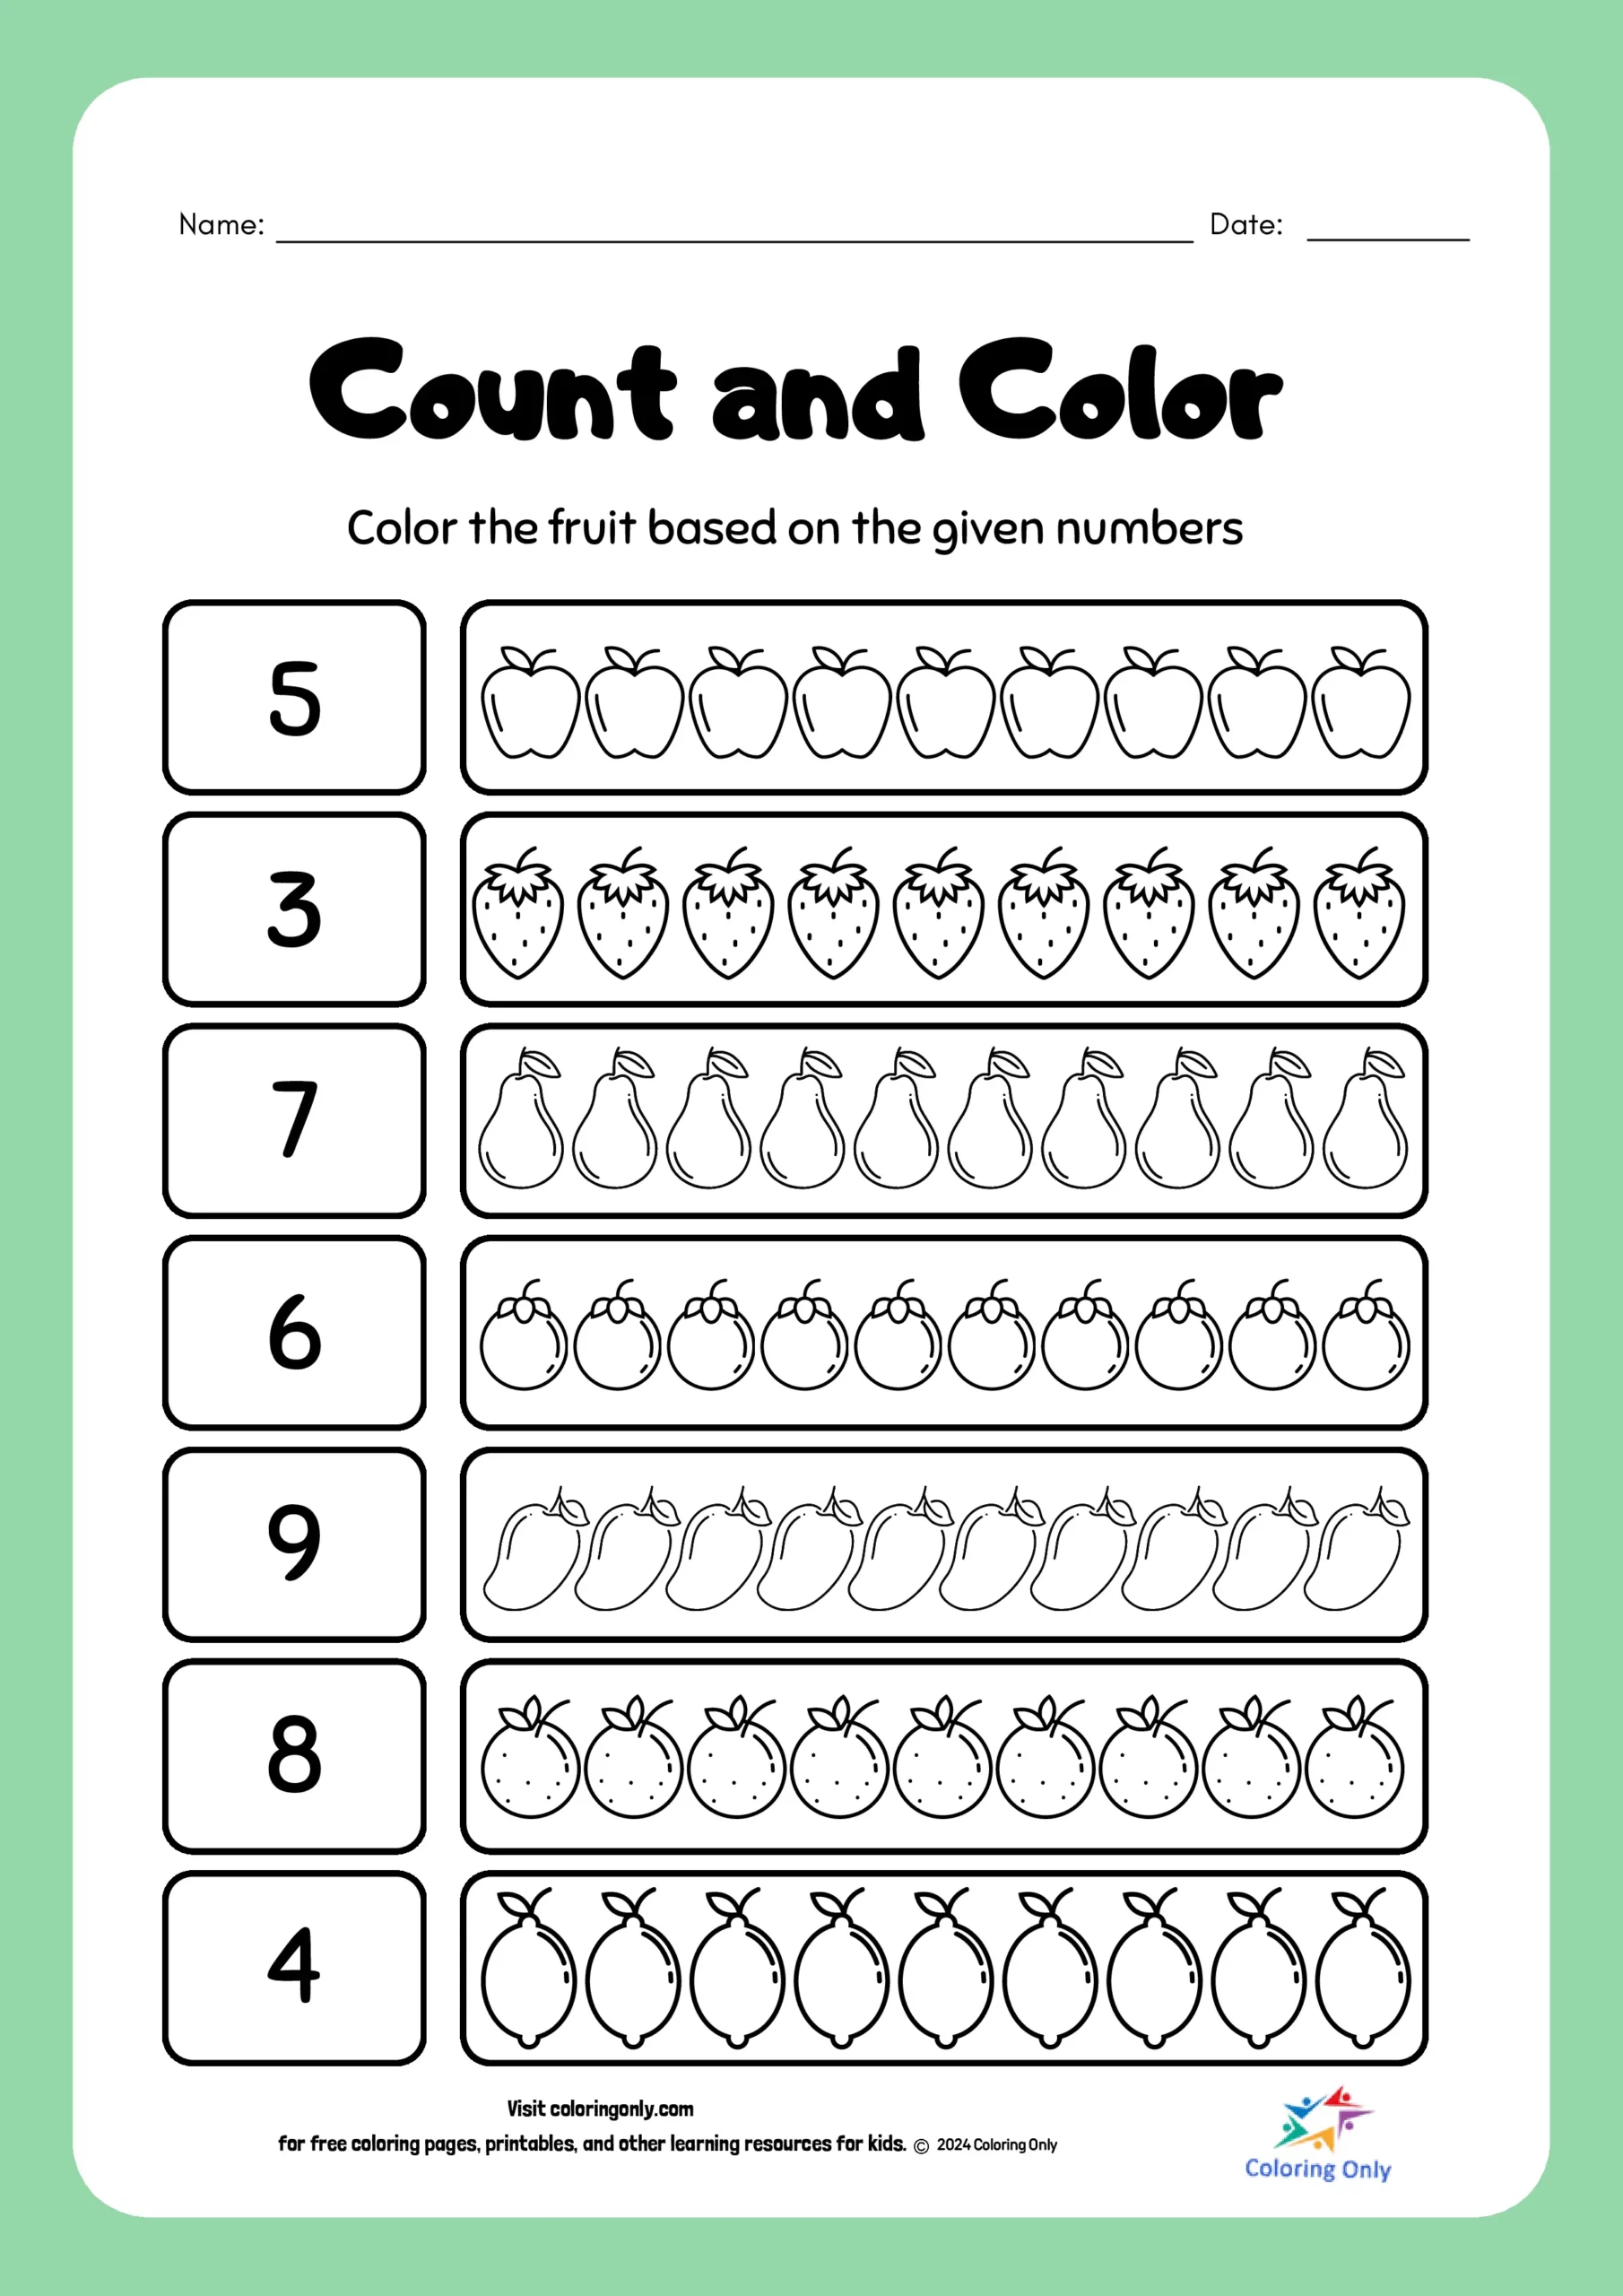 Count and Color Free Printable Worksheet